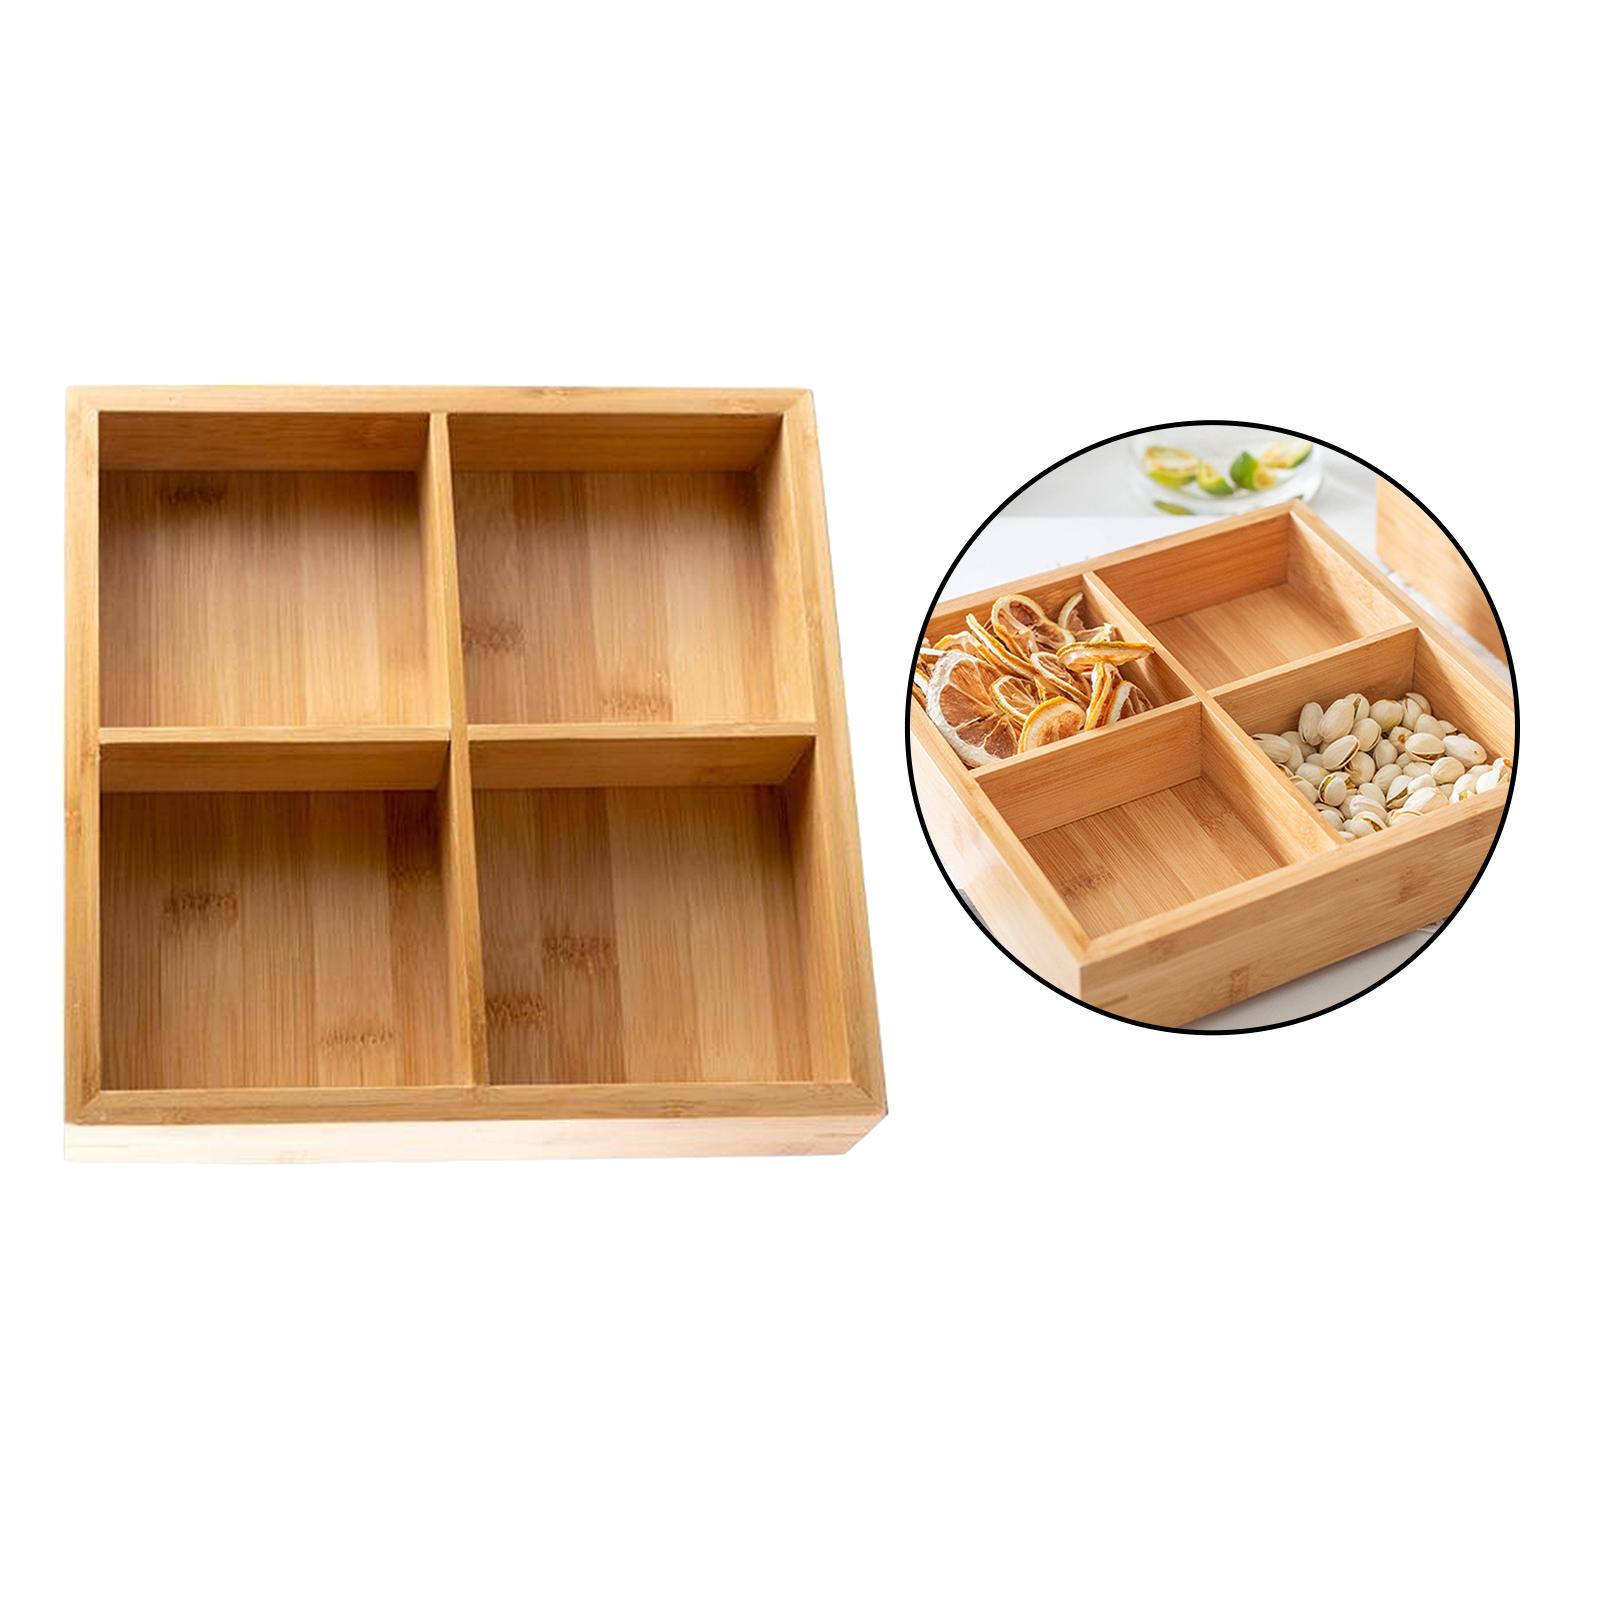 Wood Candy and Nut Serving Tray with Compartment Organizer, Square Rectangle  Sectional Wooden Food Storage Container, Divided Snack Holder Dish  22.5x22.5CM